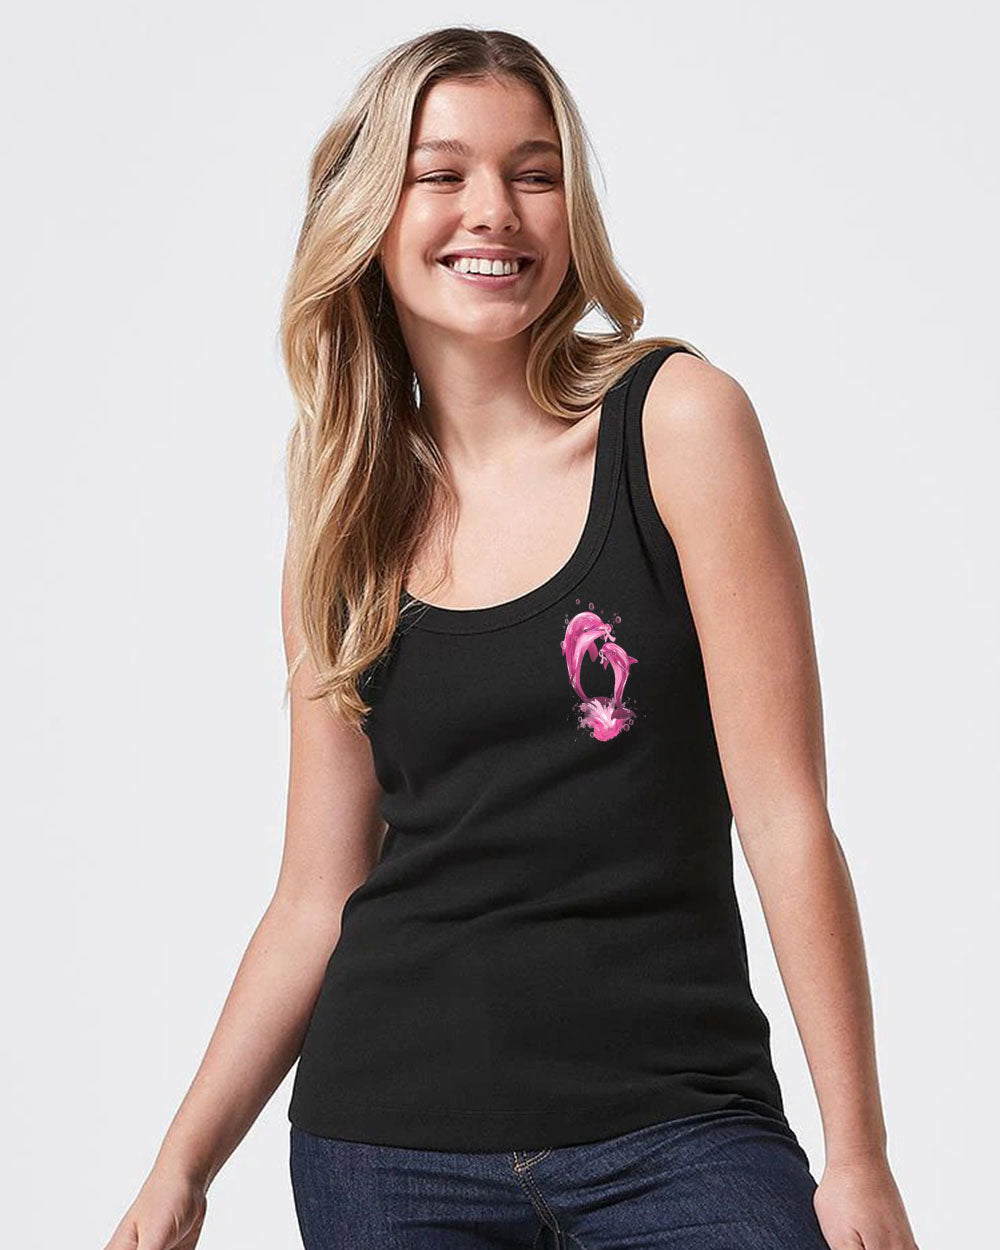 Fight Flag Dolphin Women's Breast Cancer Awareness Tanks